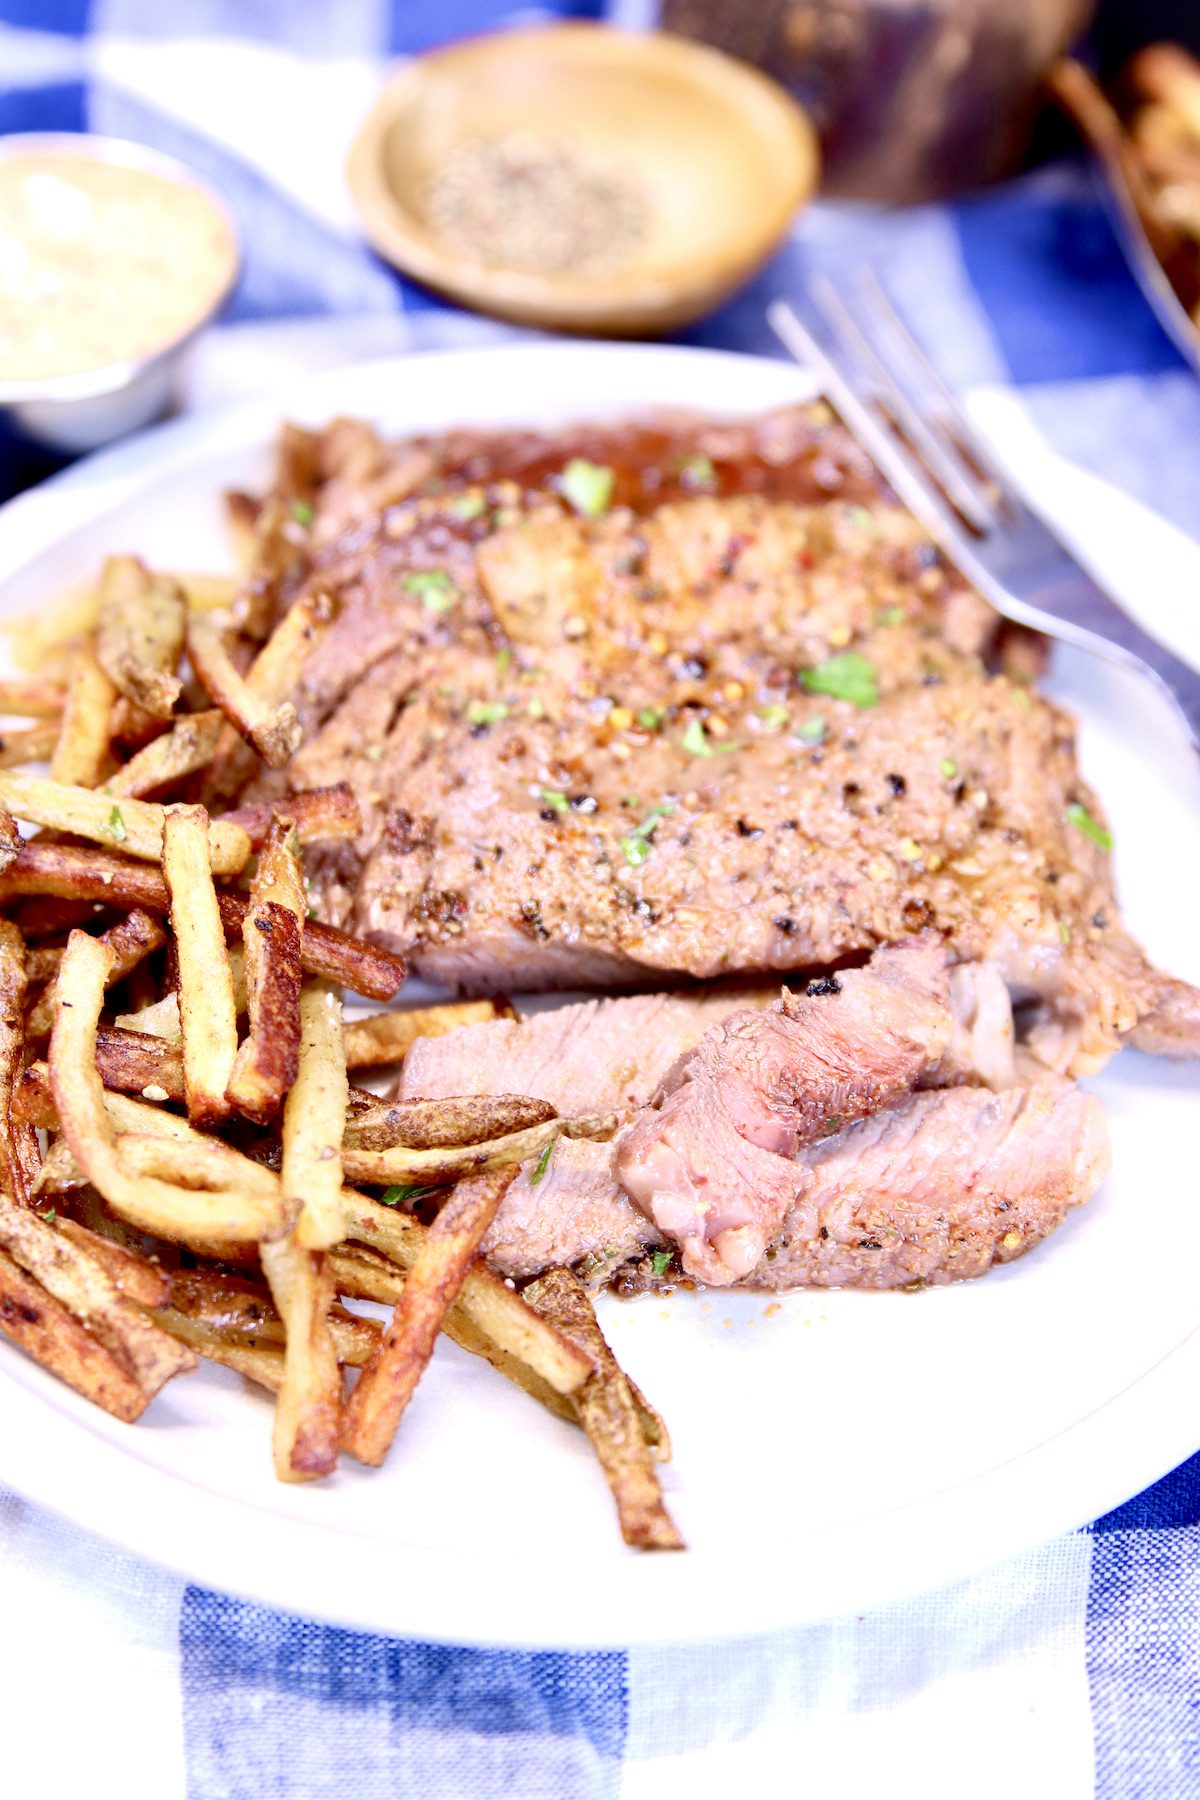 ribeye steak partially sliced on a plate with fries